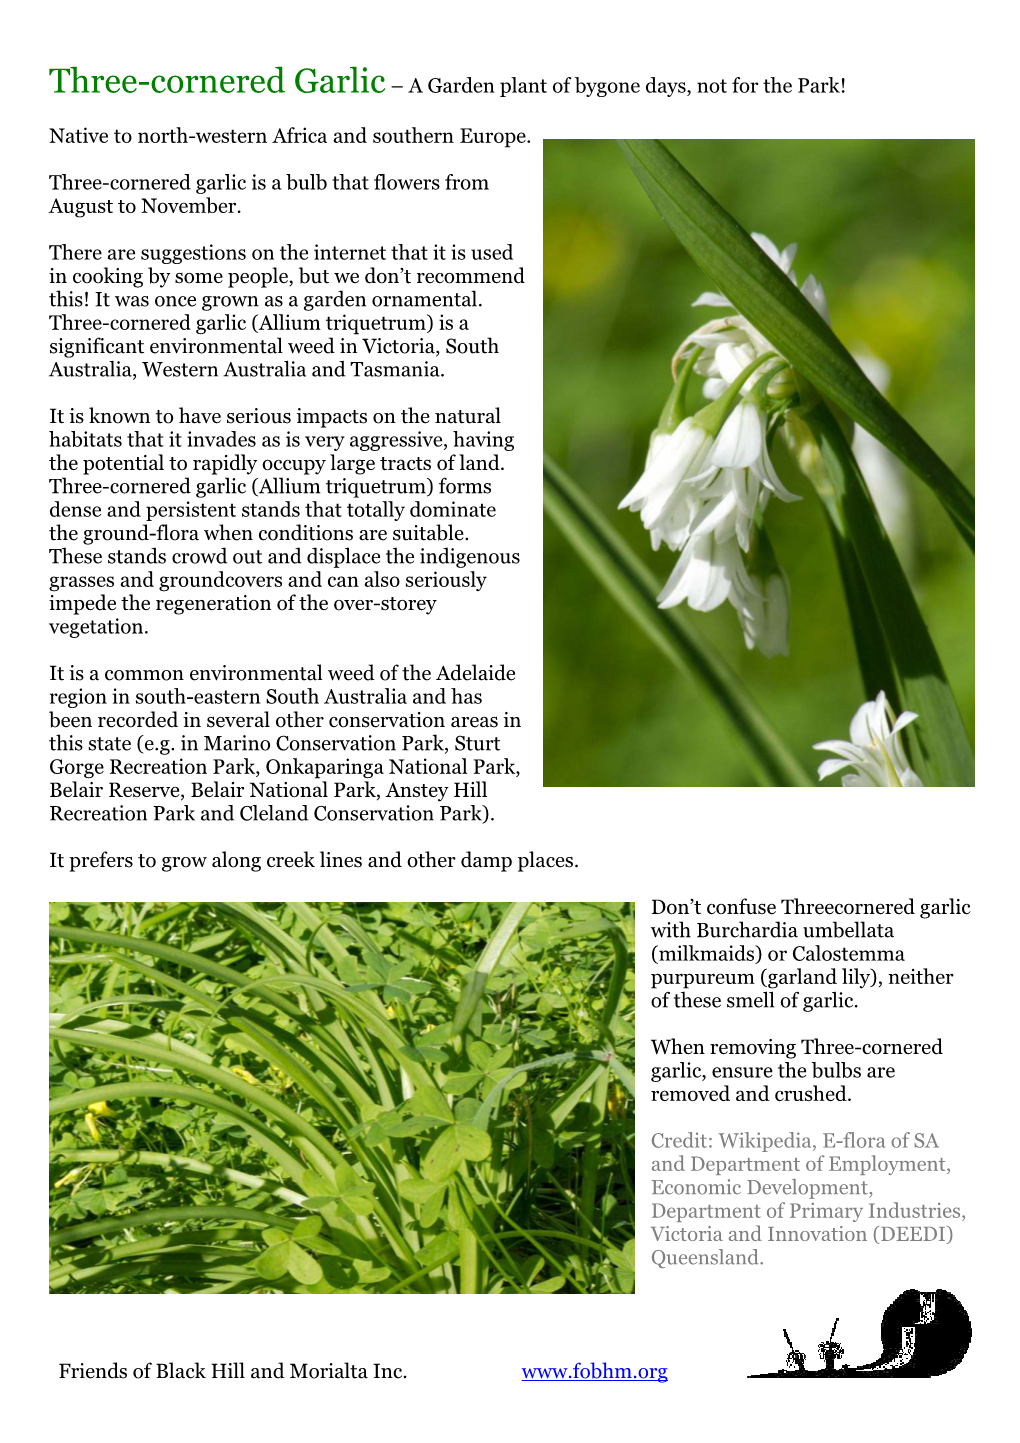 Three-Cornered Garlic– a Garden Plant of Bygone Days, Not for the Park! Friends of Black Hill and Morialta Inc